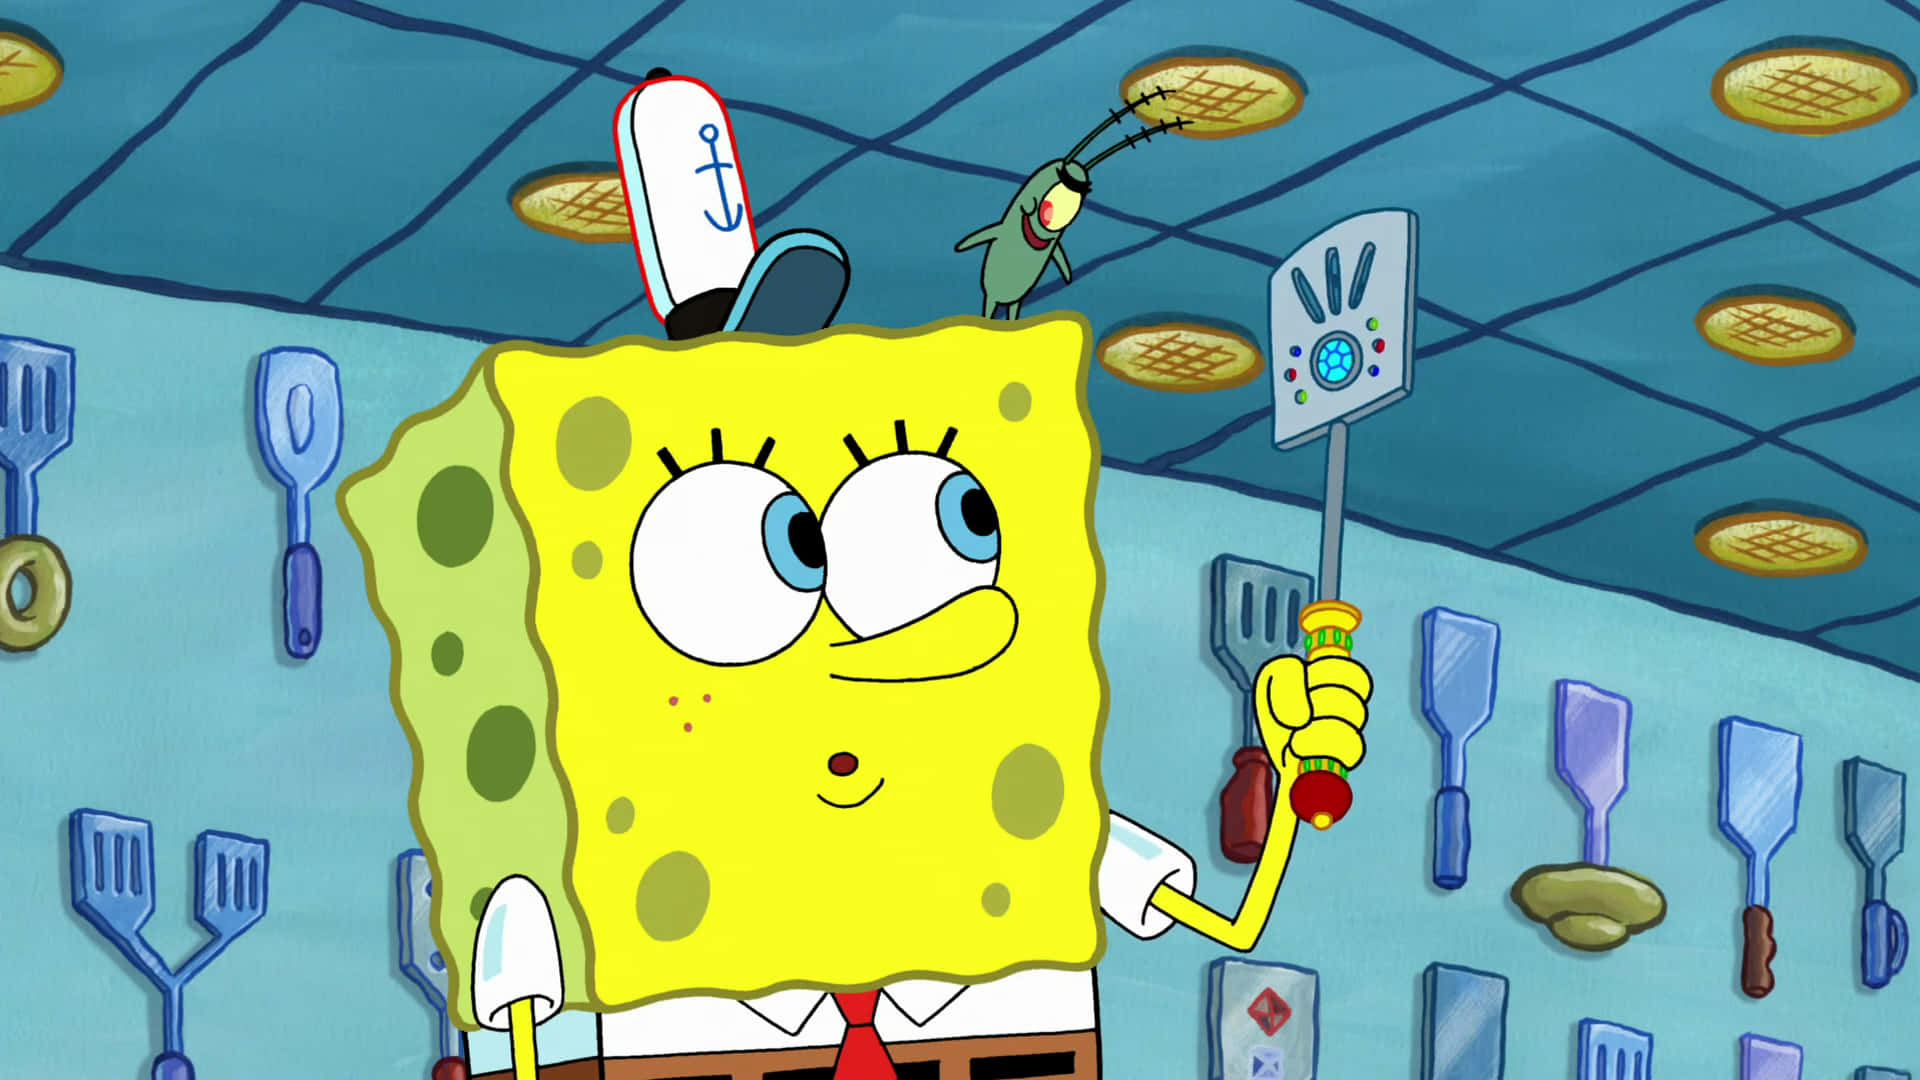 Make Your Desktop Sparkle With This Colorful Spongebob Wallpaper Background